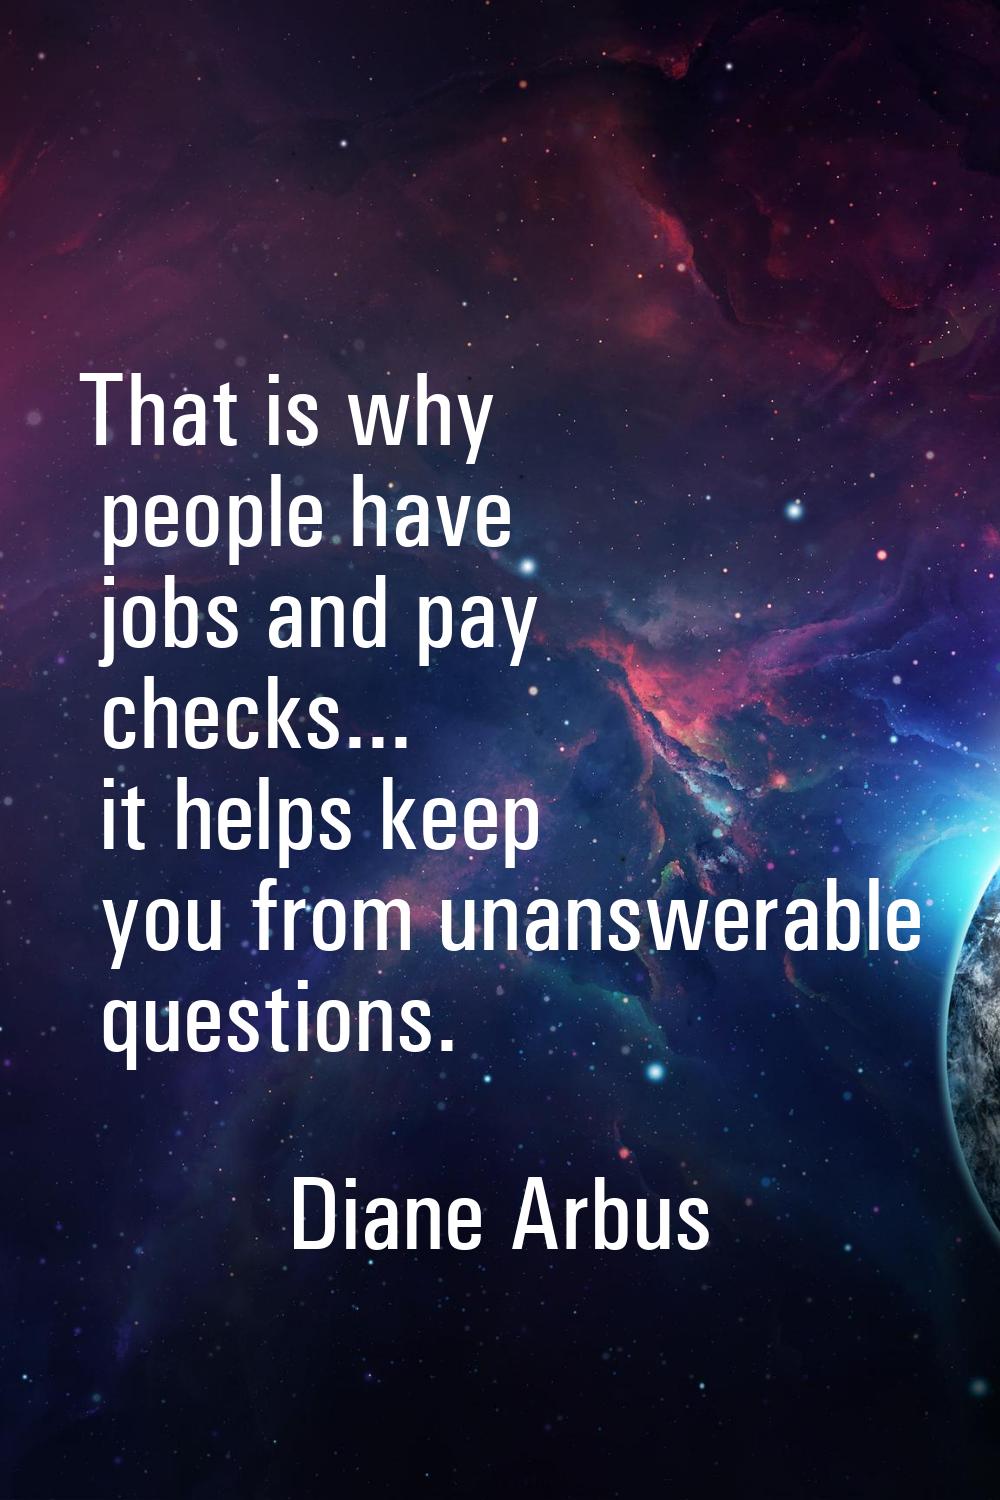 That is why people have jobs and pay checks... it helps keep you from unanswerable questions.